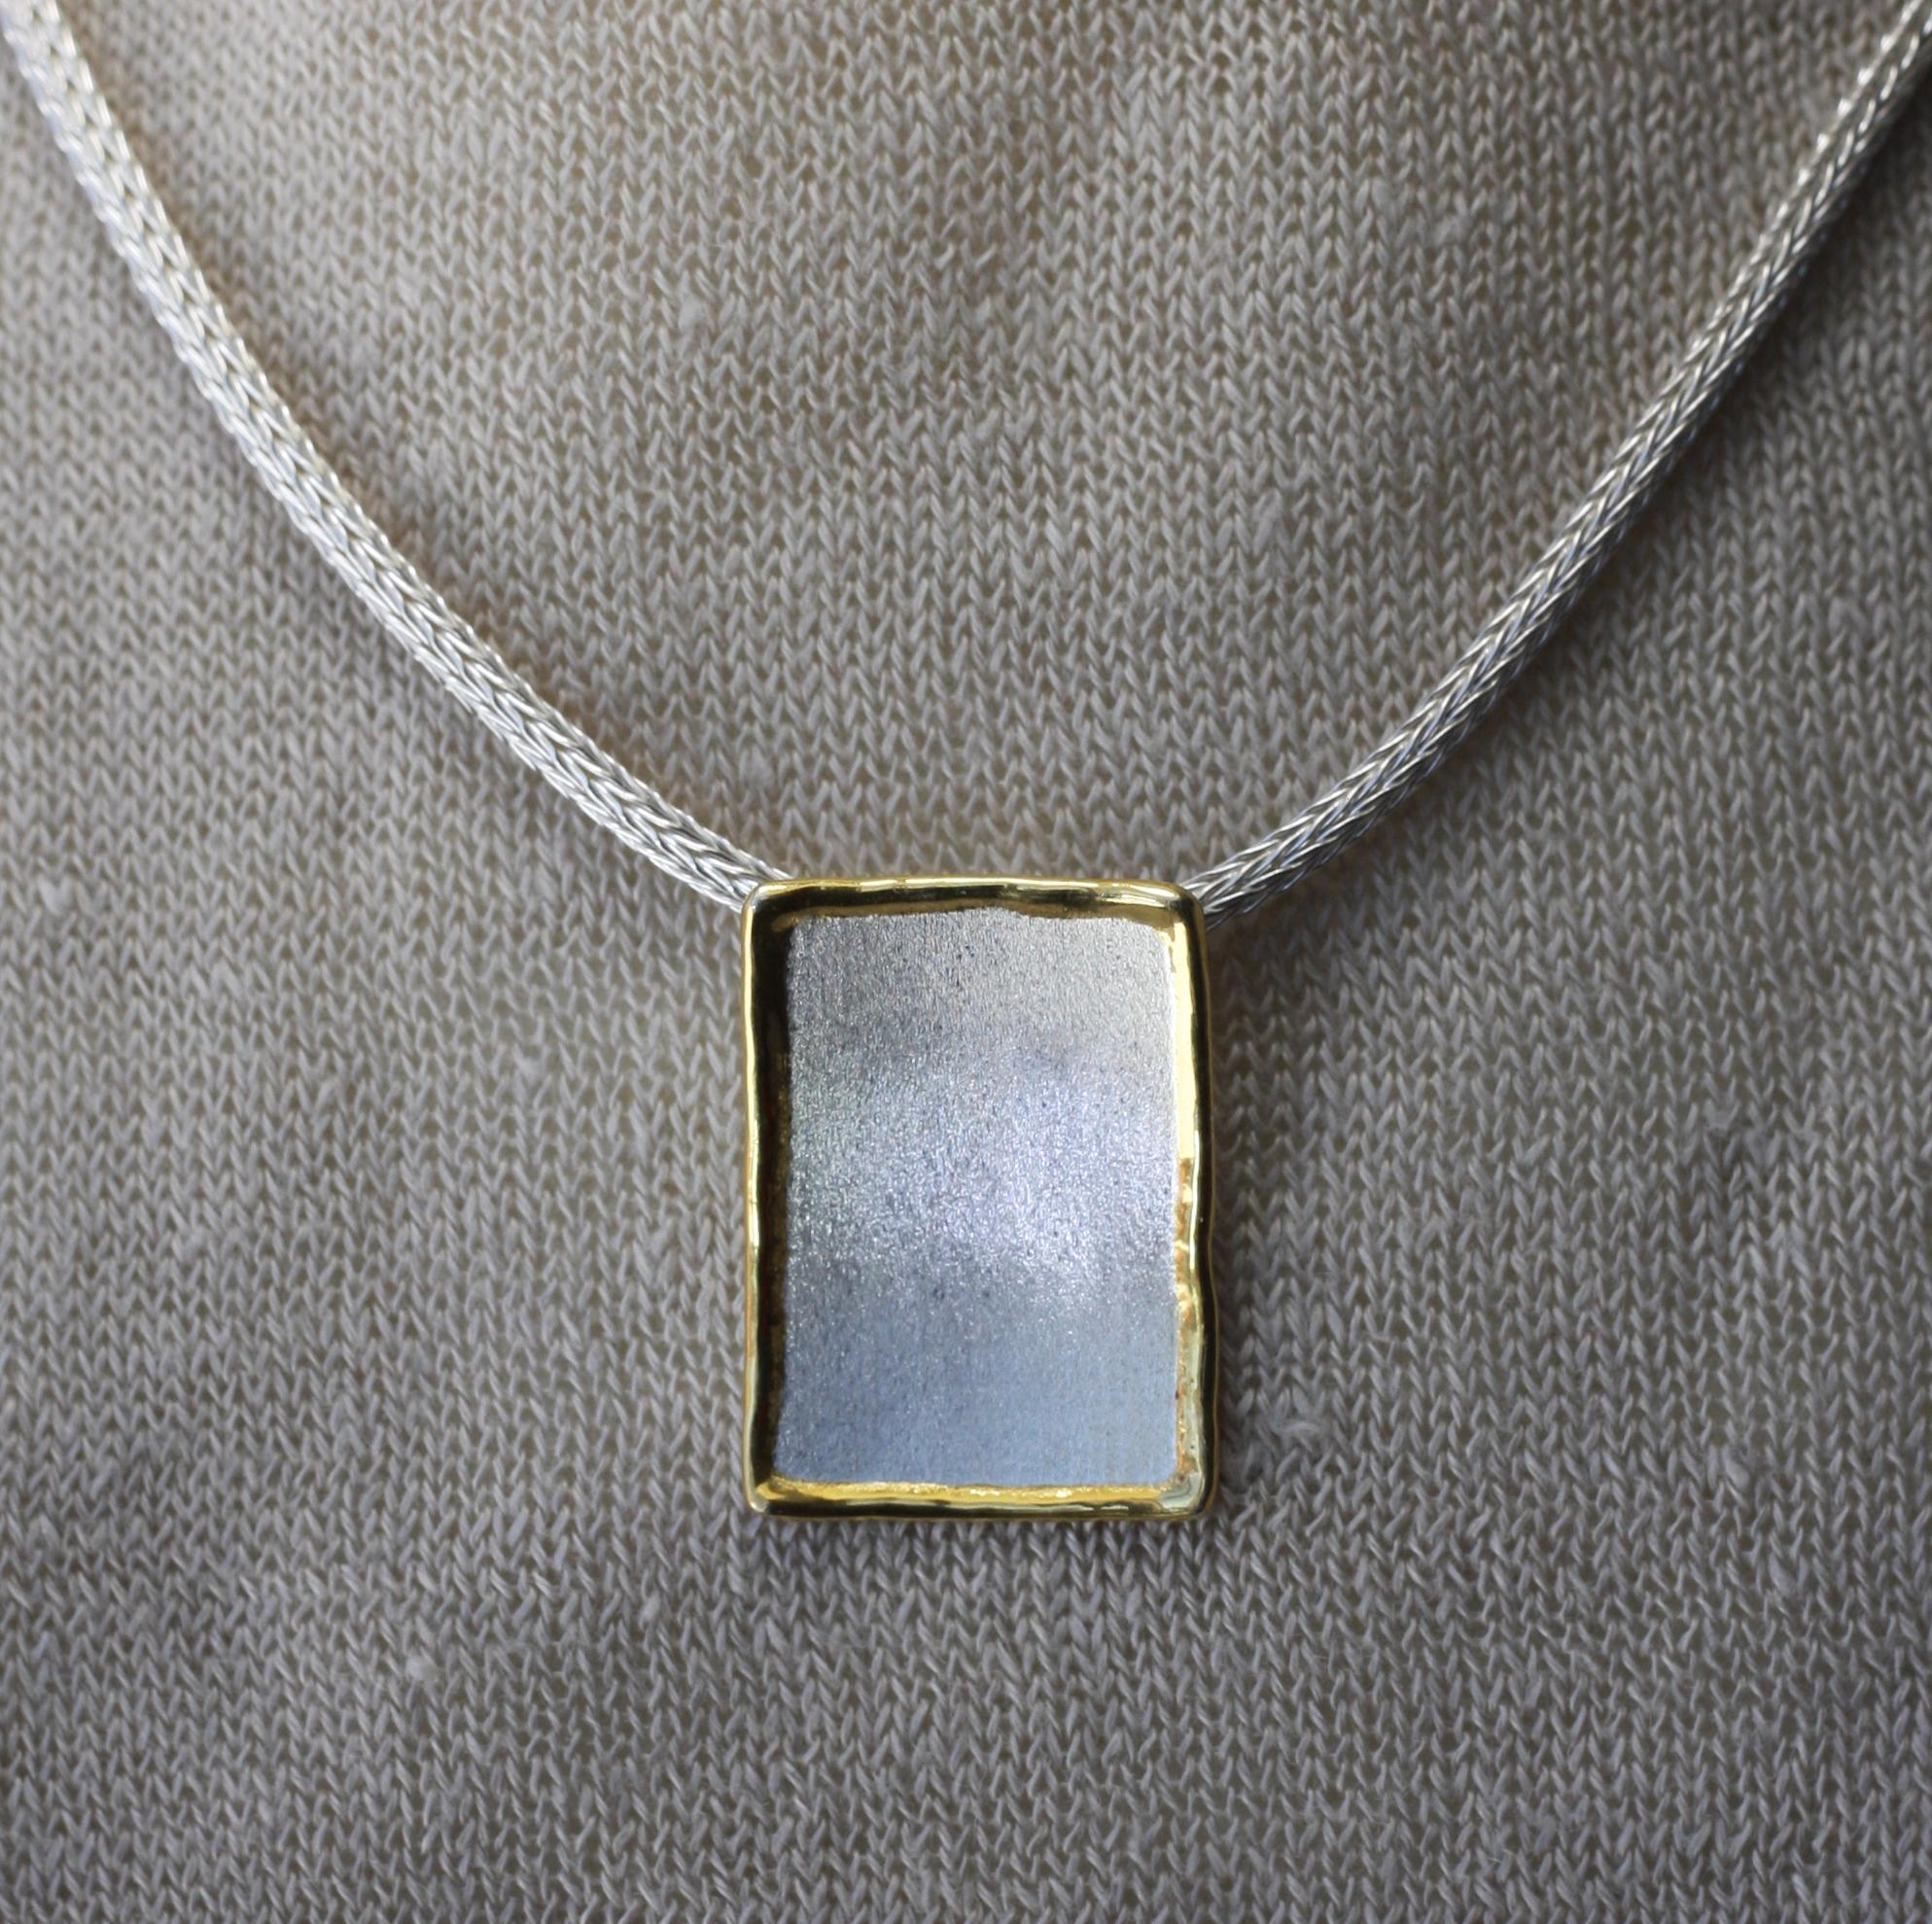 Yianni Creations Fine Silver 24 Karat Gold Two-Tone Rectangular Pendant Enhancer In New Condition For Sale In Astoria, NY